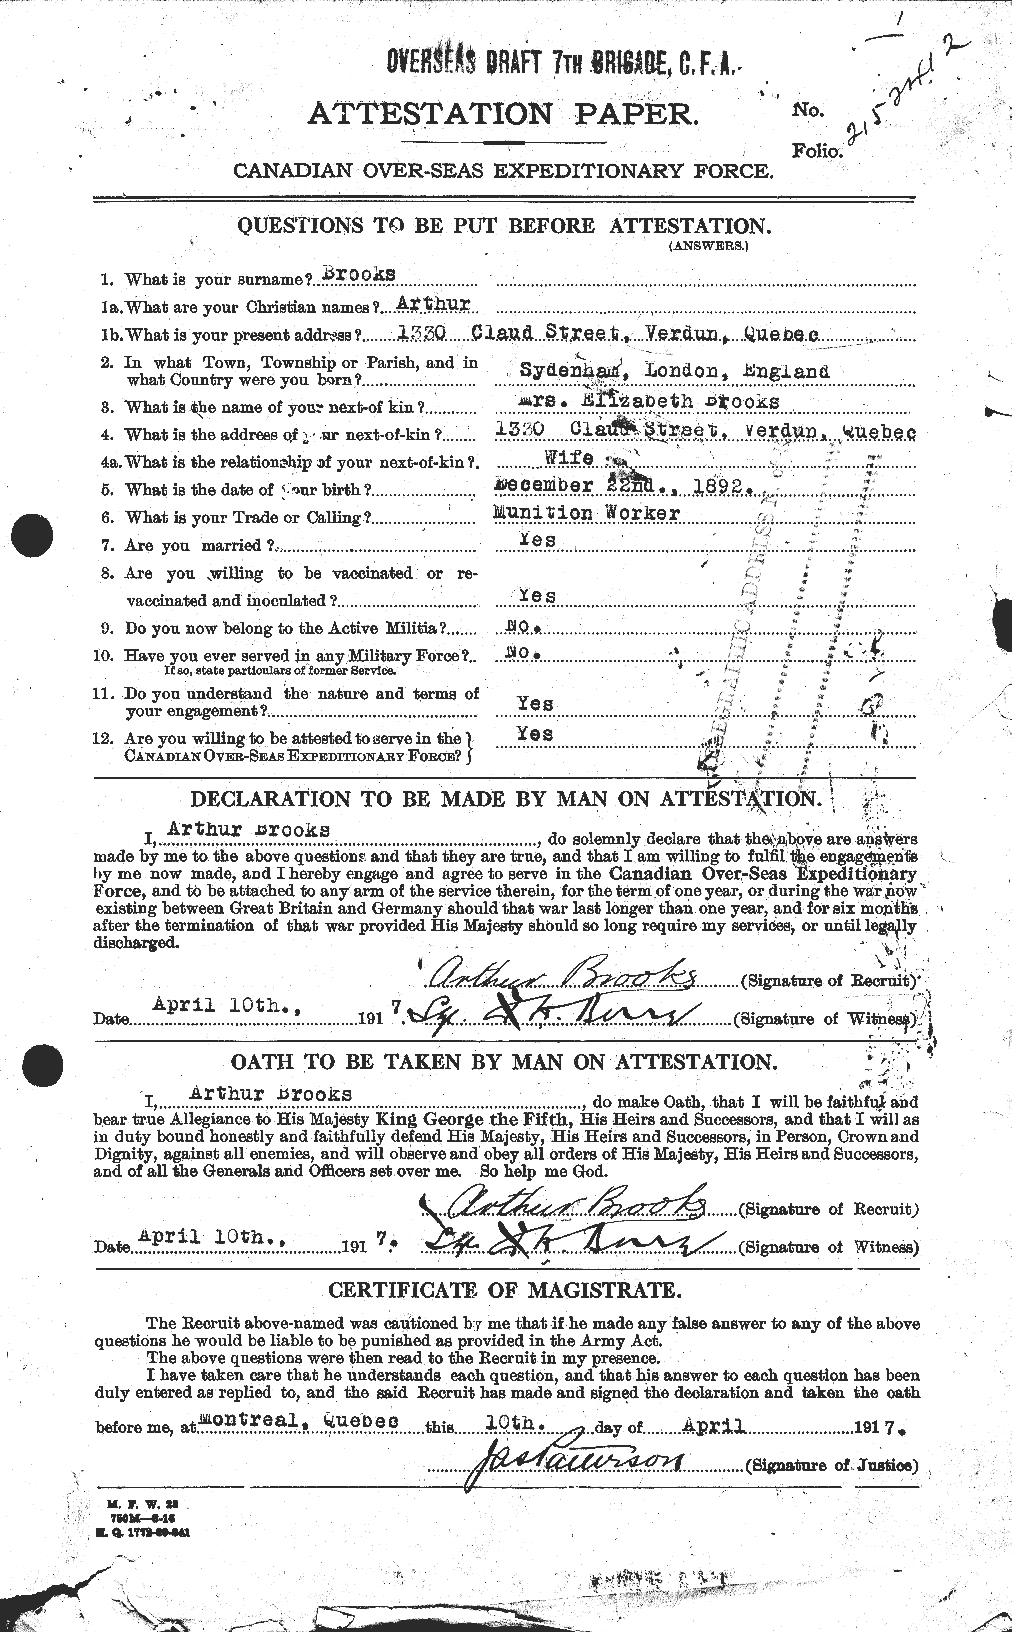 Personnel Records of the First World War - CEF 261488a